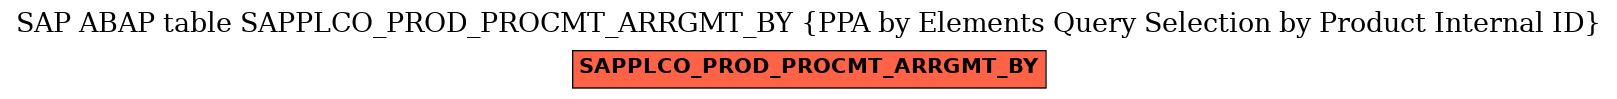 E-R Diagram for table SAPPLCO_PROD_PROCMT_ARRGMT_BY (PPA by Elements Query Selection by Product Internal ID)